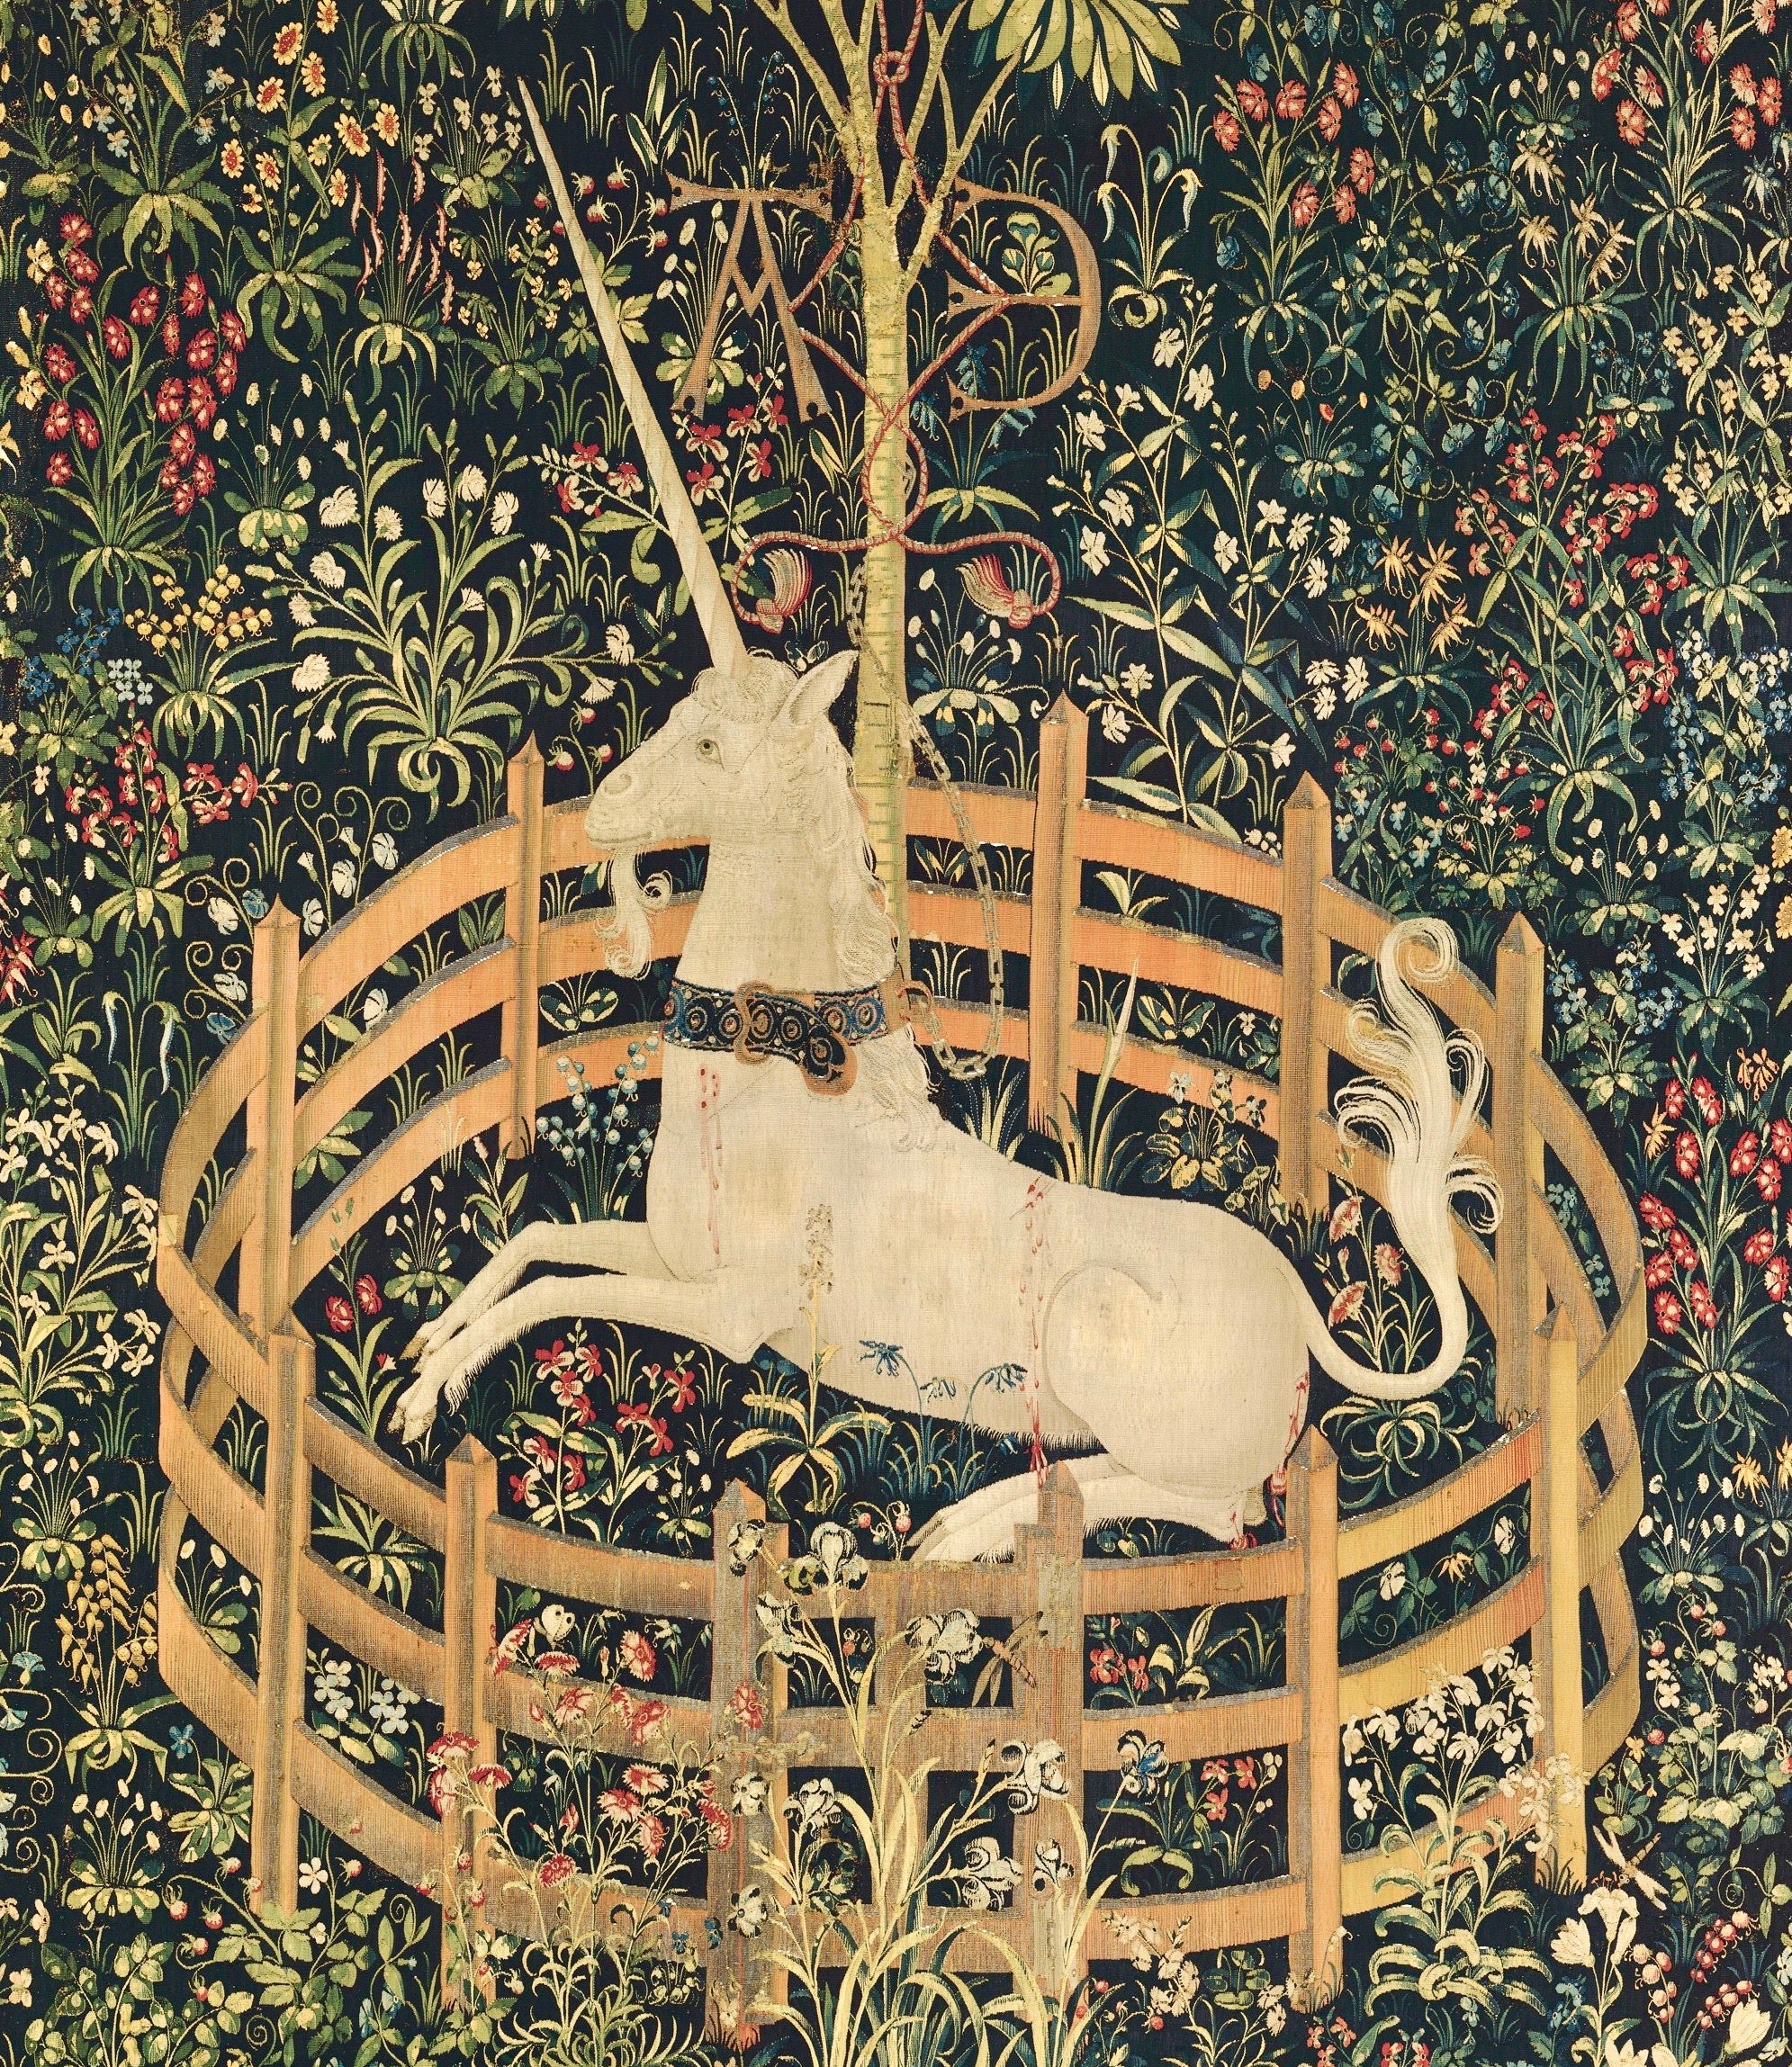 <img src= "The Unicorn in Captivity.jpg" alt= "Tapestry of a unicorn captured within a fence"